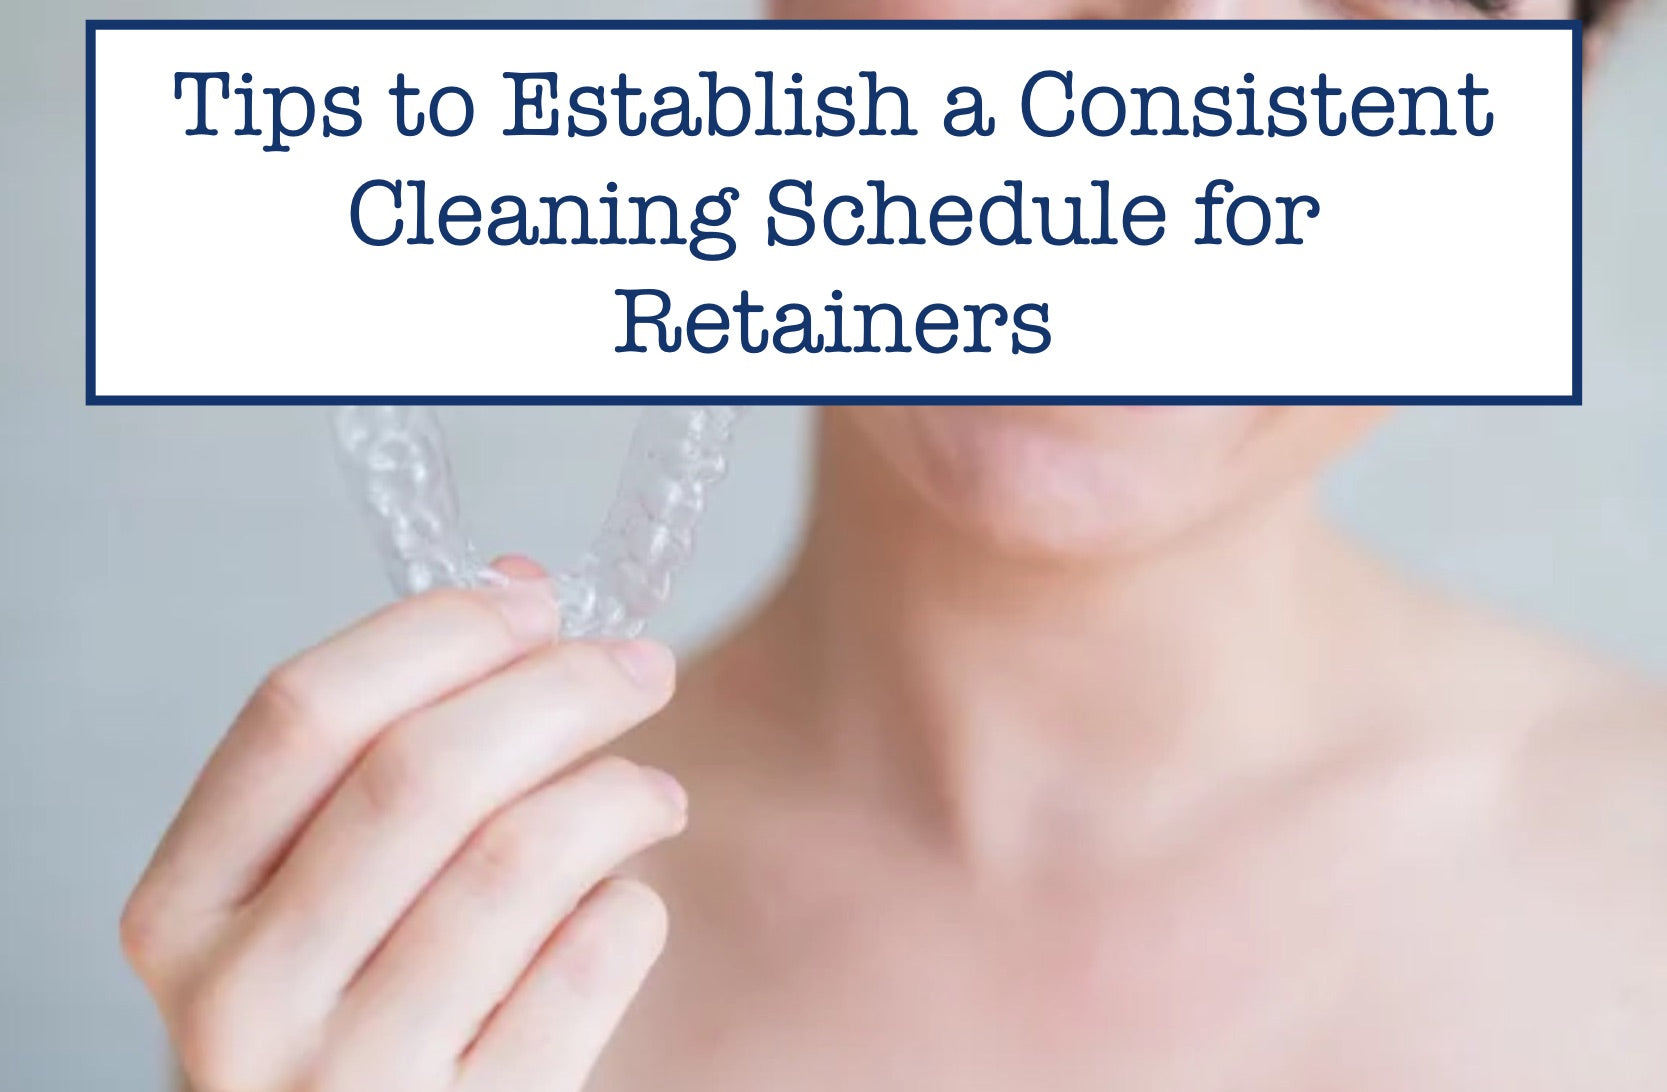 Tips to Establish a Consistent Cleaning Schedule for Retainers